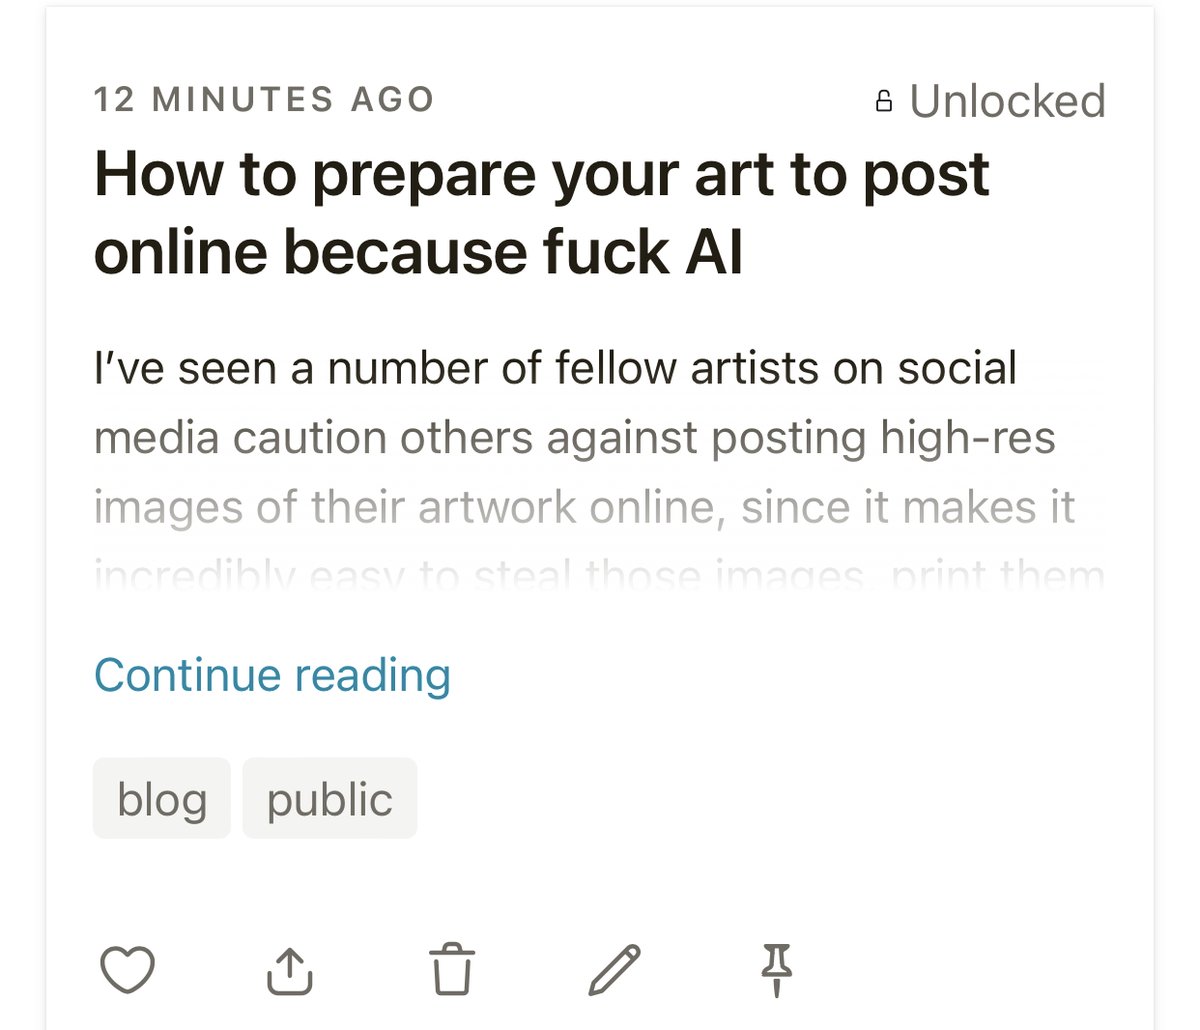 I wrote a public blog post that goes through the process of formatting your art to post online safely by reducing the DPI and file size without losing overall visual quality. Read it now: patreon.com/posts/75837486